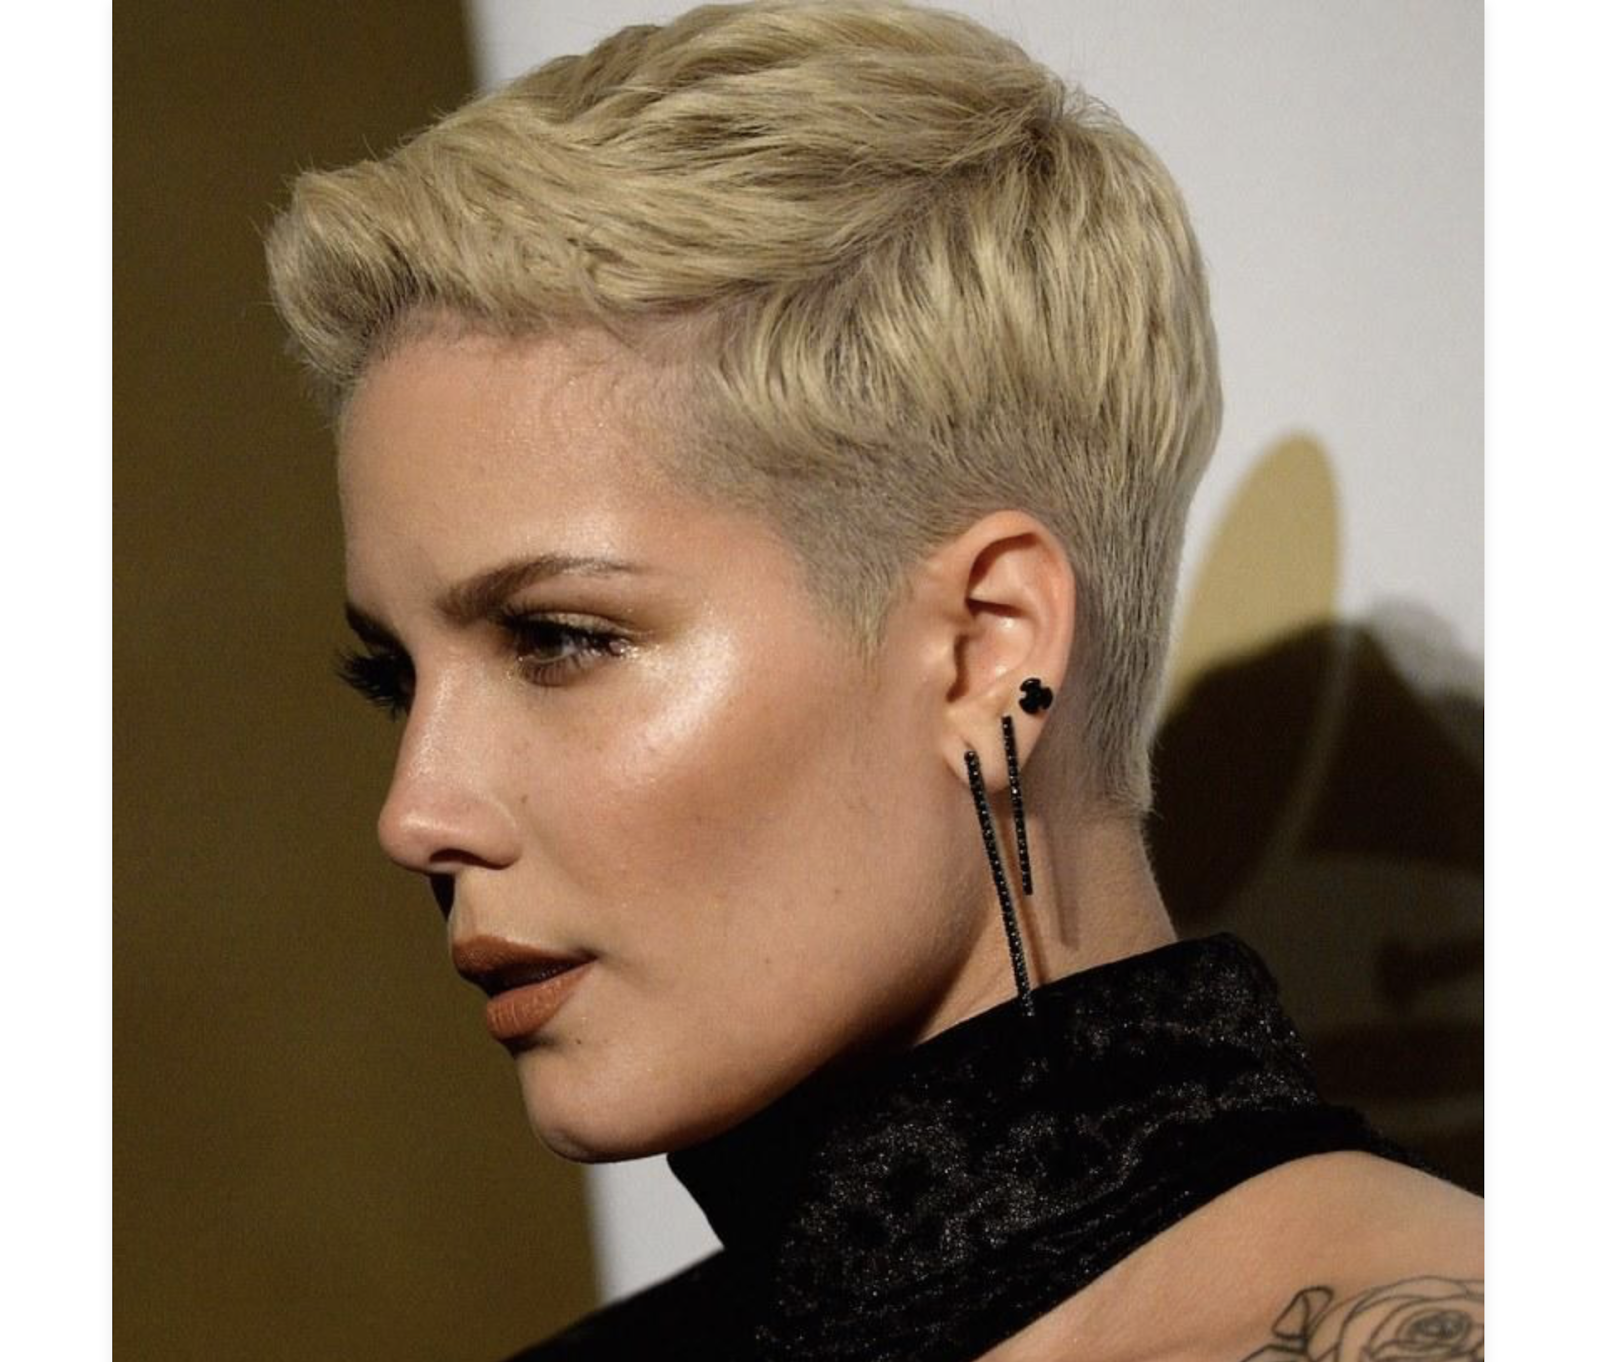 PIXIE STYLE HAIRCUTS 2022 - 2023 FOR WOMEN - 100+ PICTURES ...